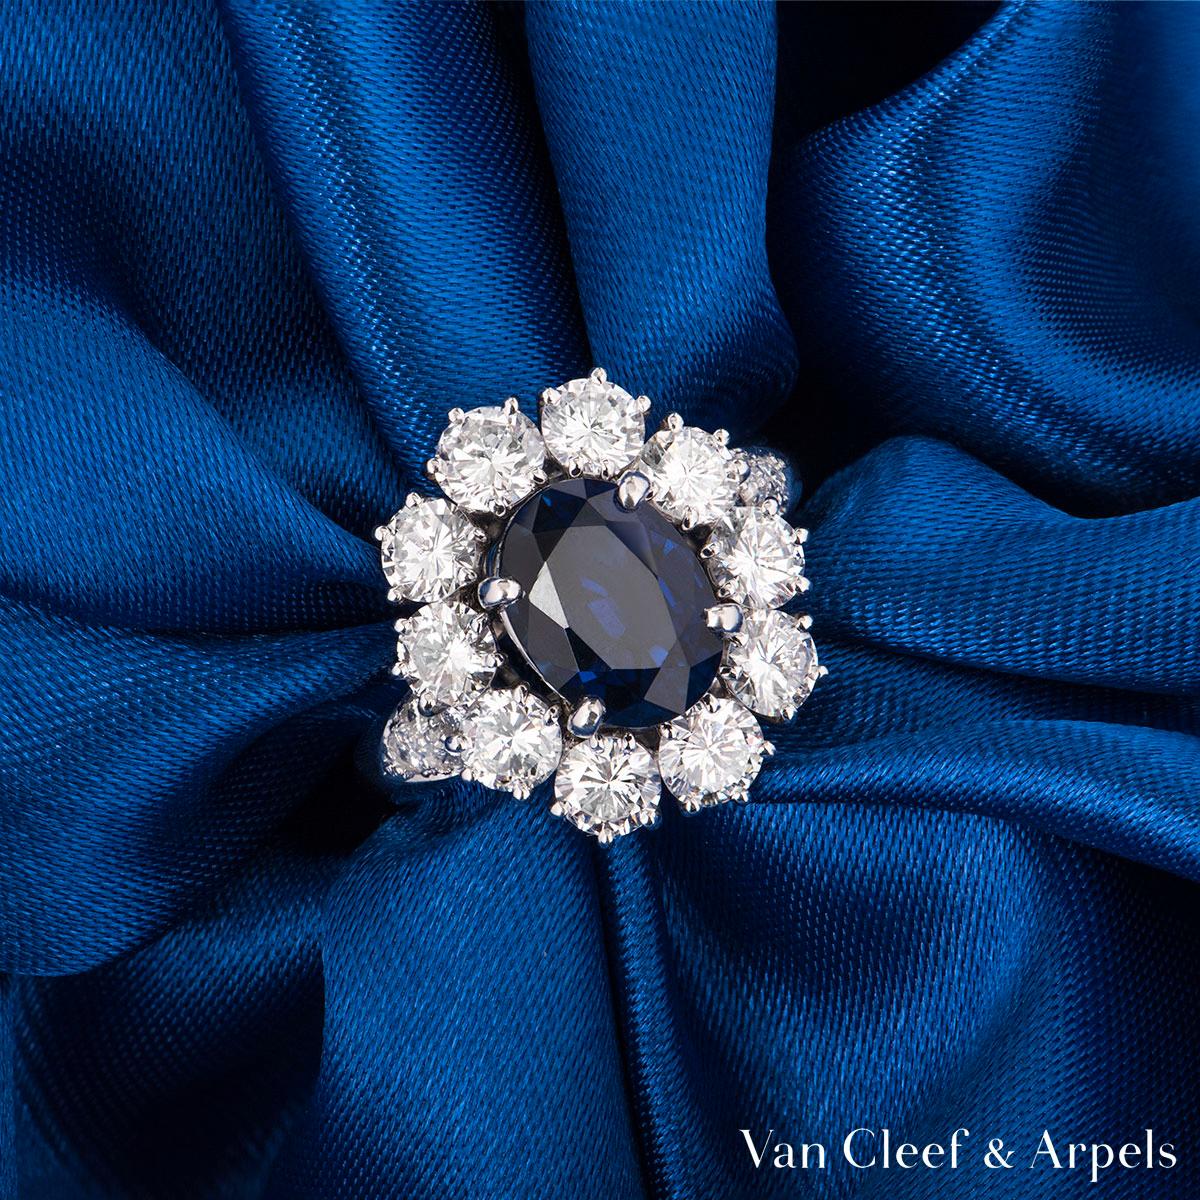 An 18k white gold sapphire and diamond ring by Van Cleef & Arpels. The ring is set to the centre with a 2.48ct natural oval cut sapphire, accentuated by a halo of 12 round brilliant cut diamonds and a further 5 on each side of the mount with a total